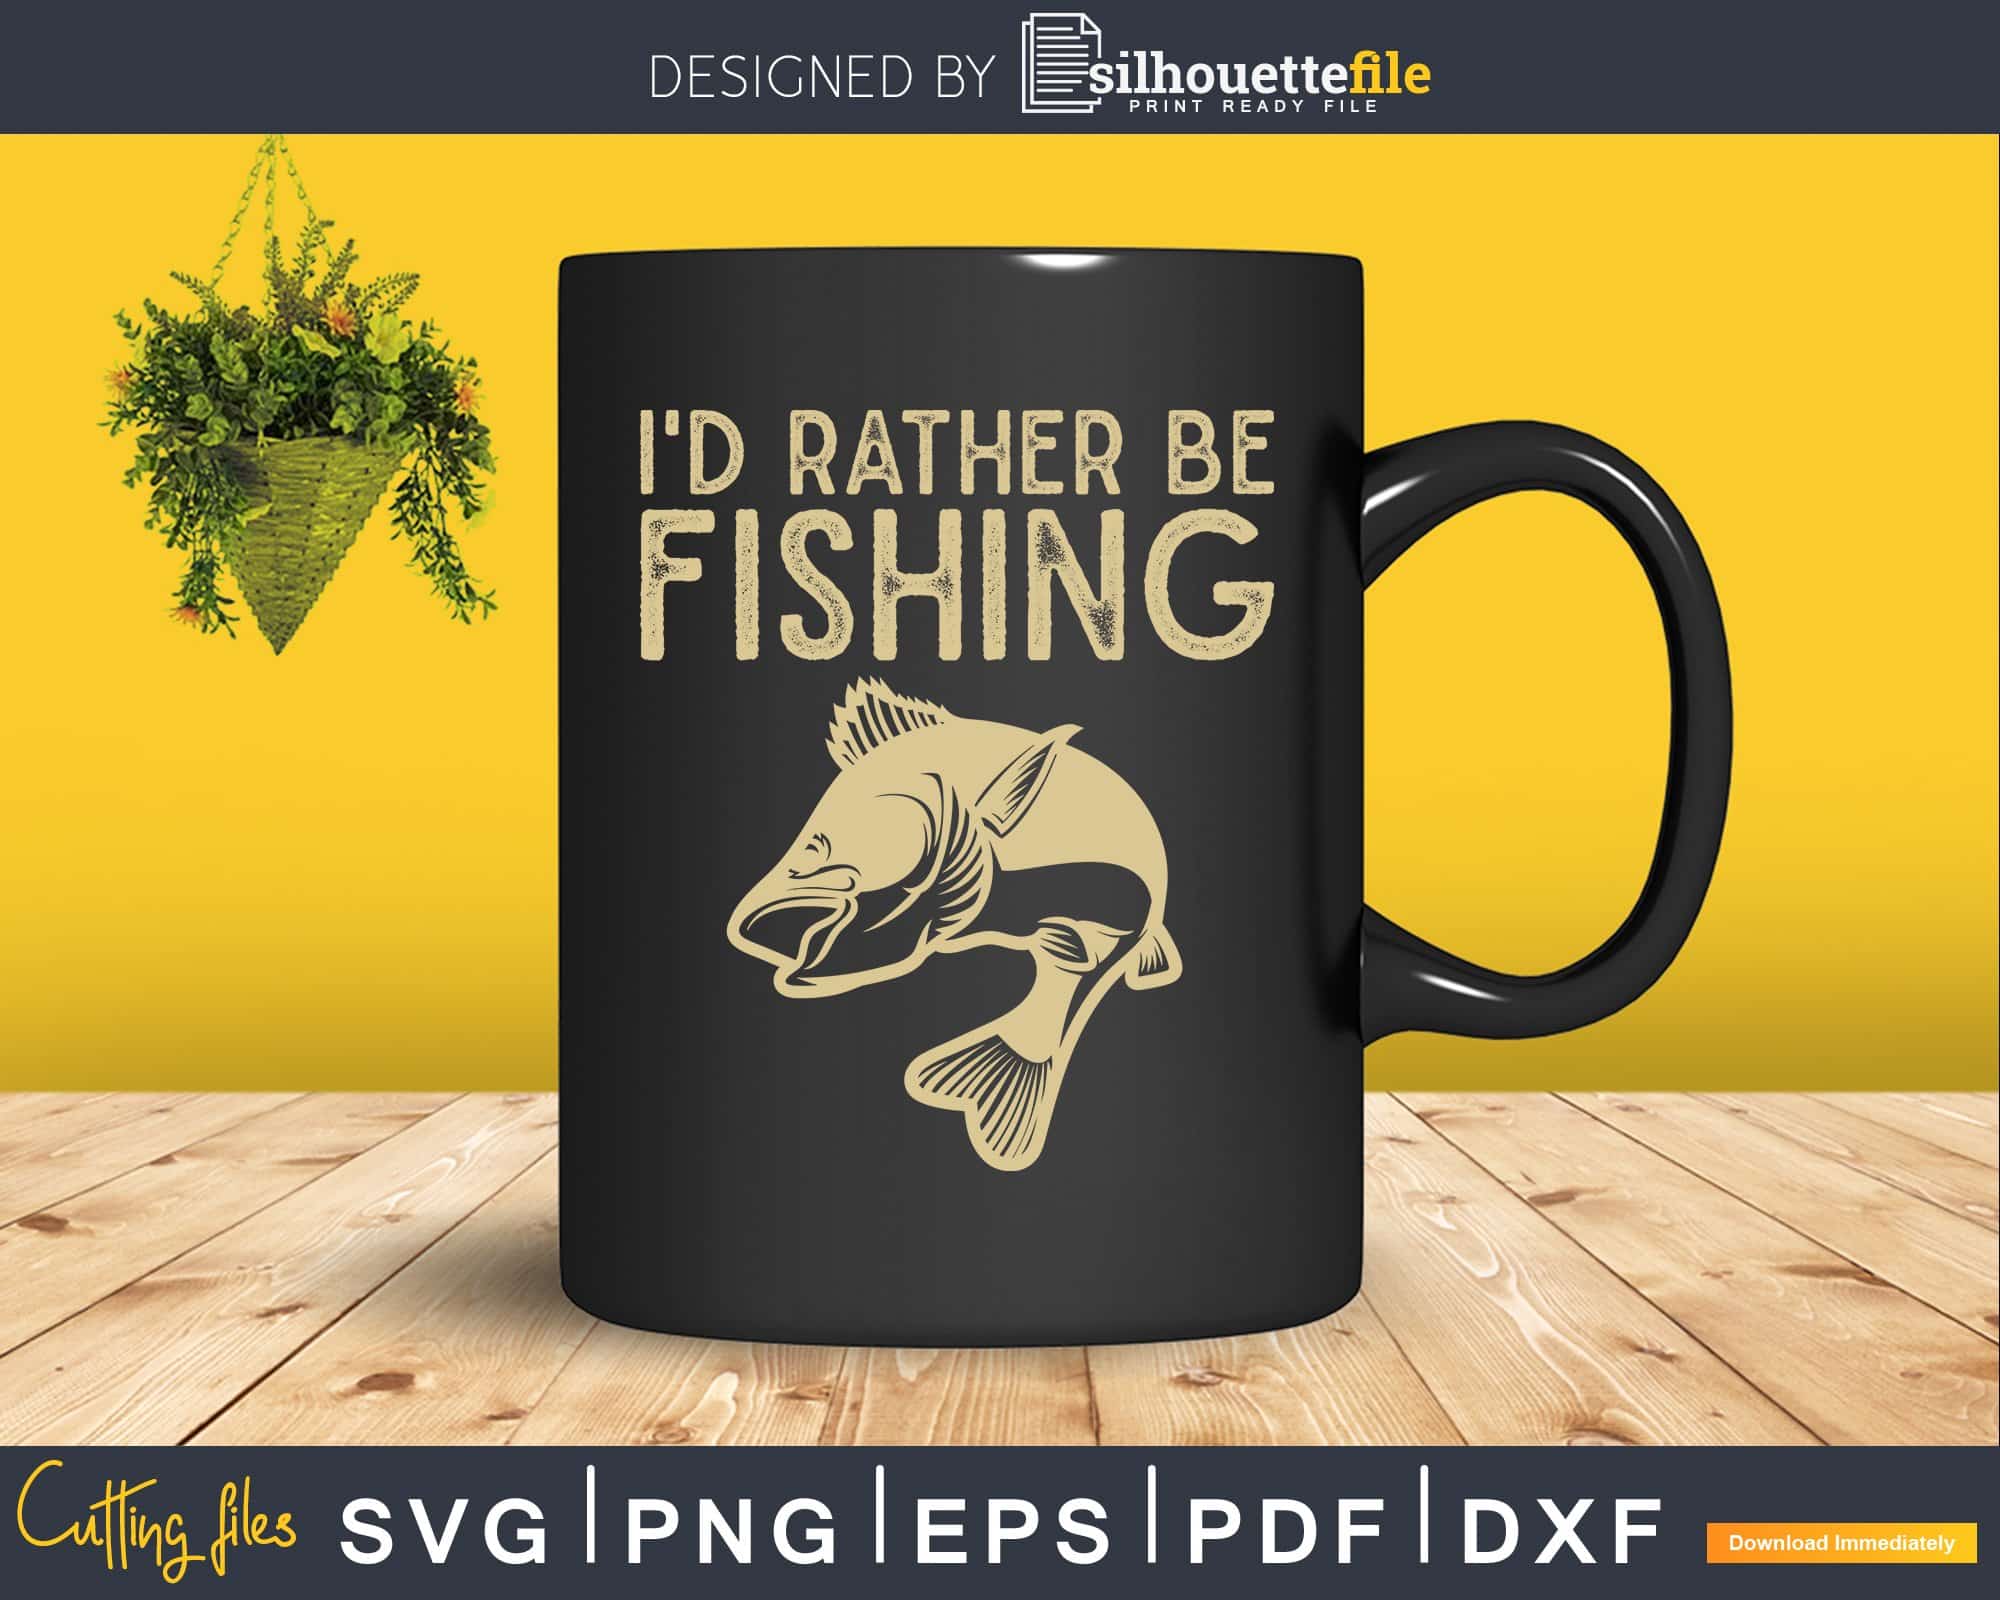 Buy Fishing Makes Me Happy SVG Instant Download Printable Cut File